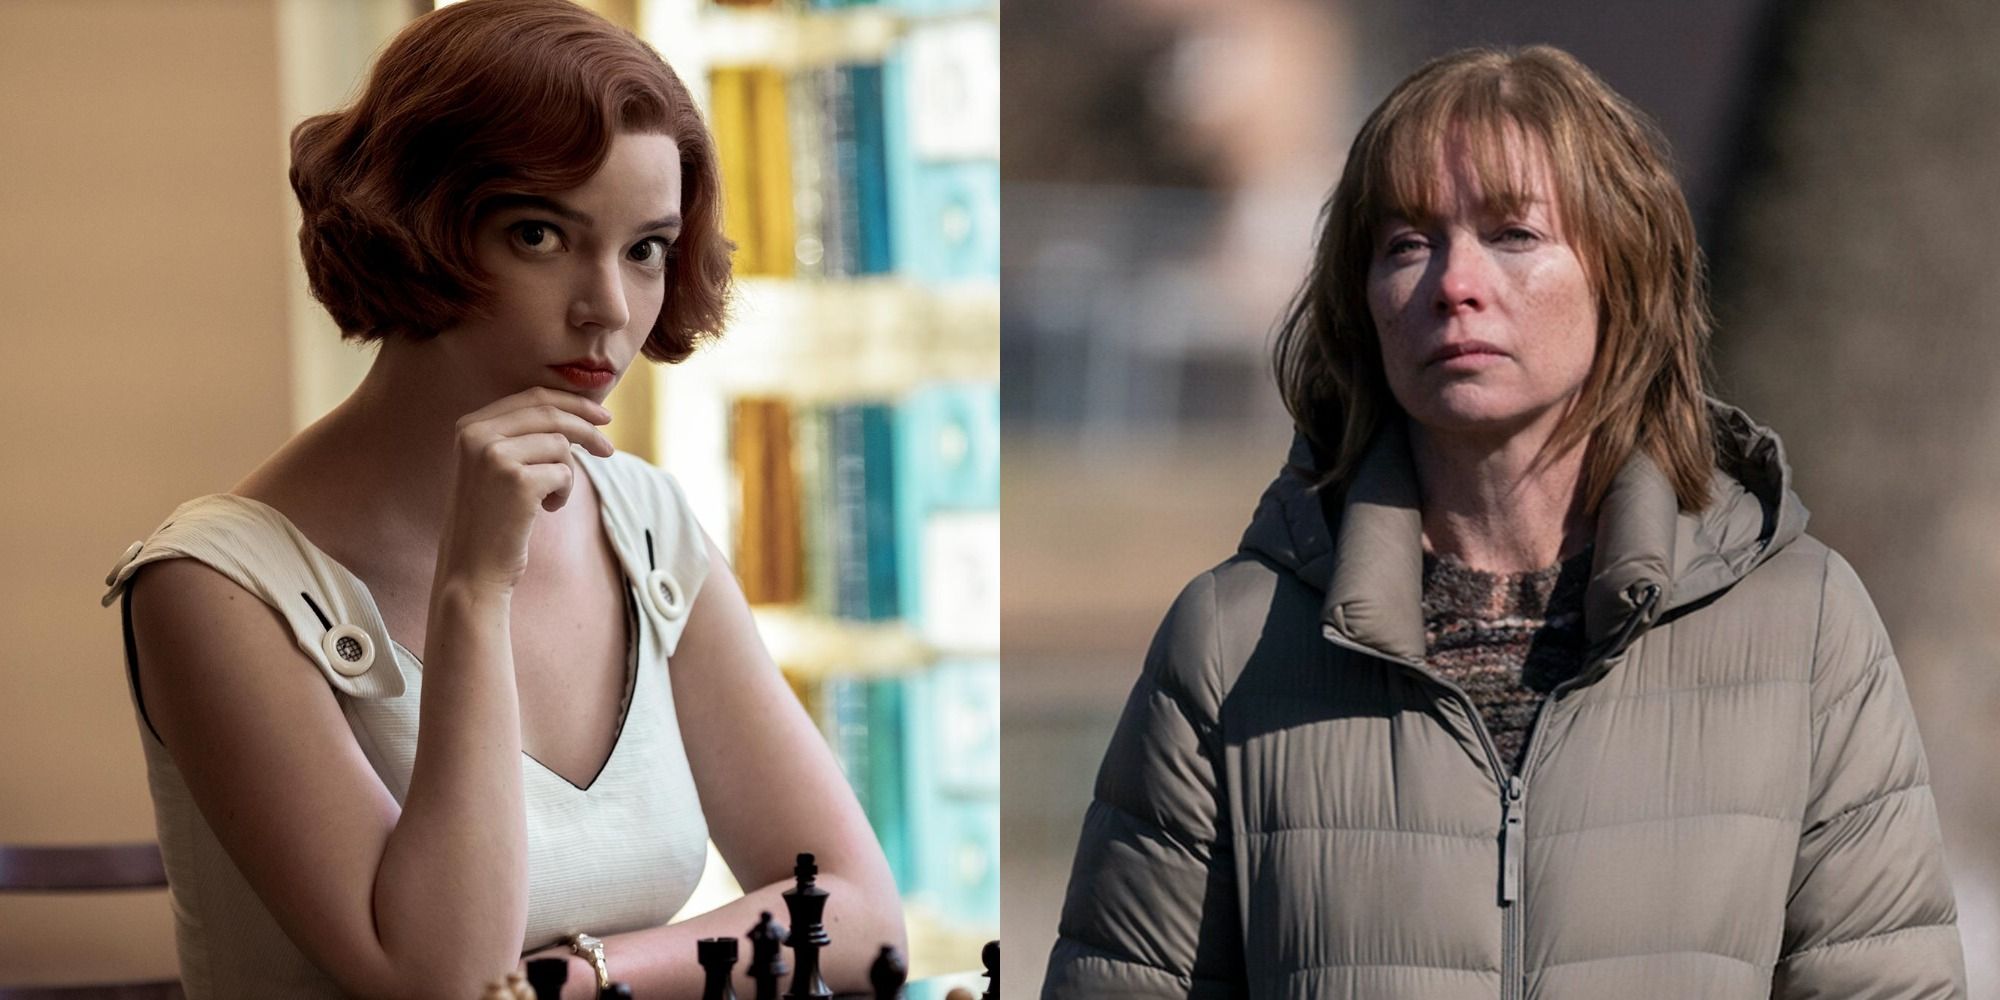 Split image showing Anya Taylor-Joy in The Queen's Gambit, and Julianne Nicholson in Mare of Easttown.